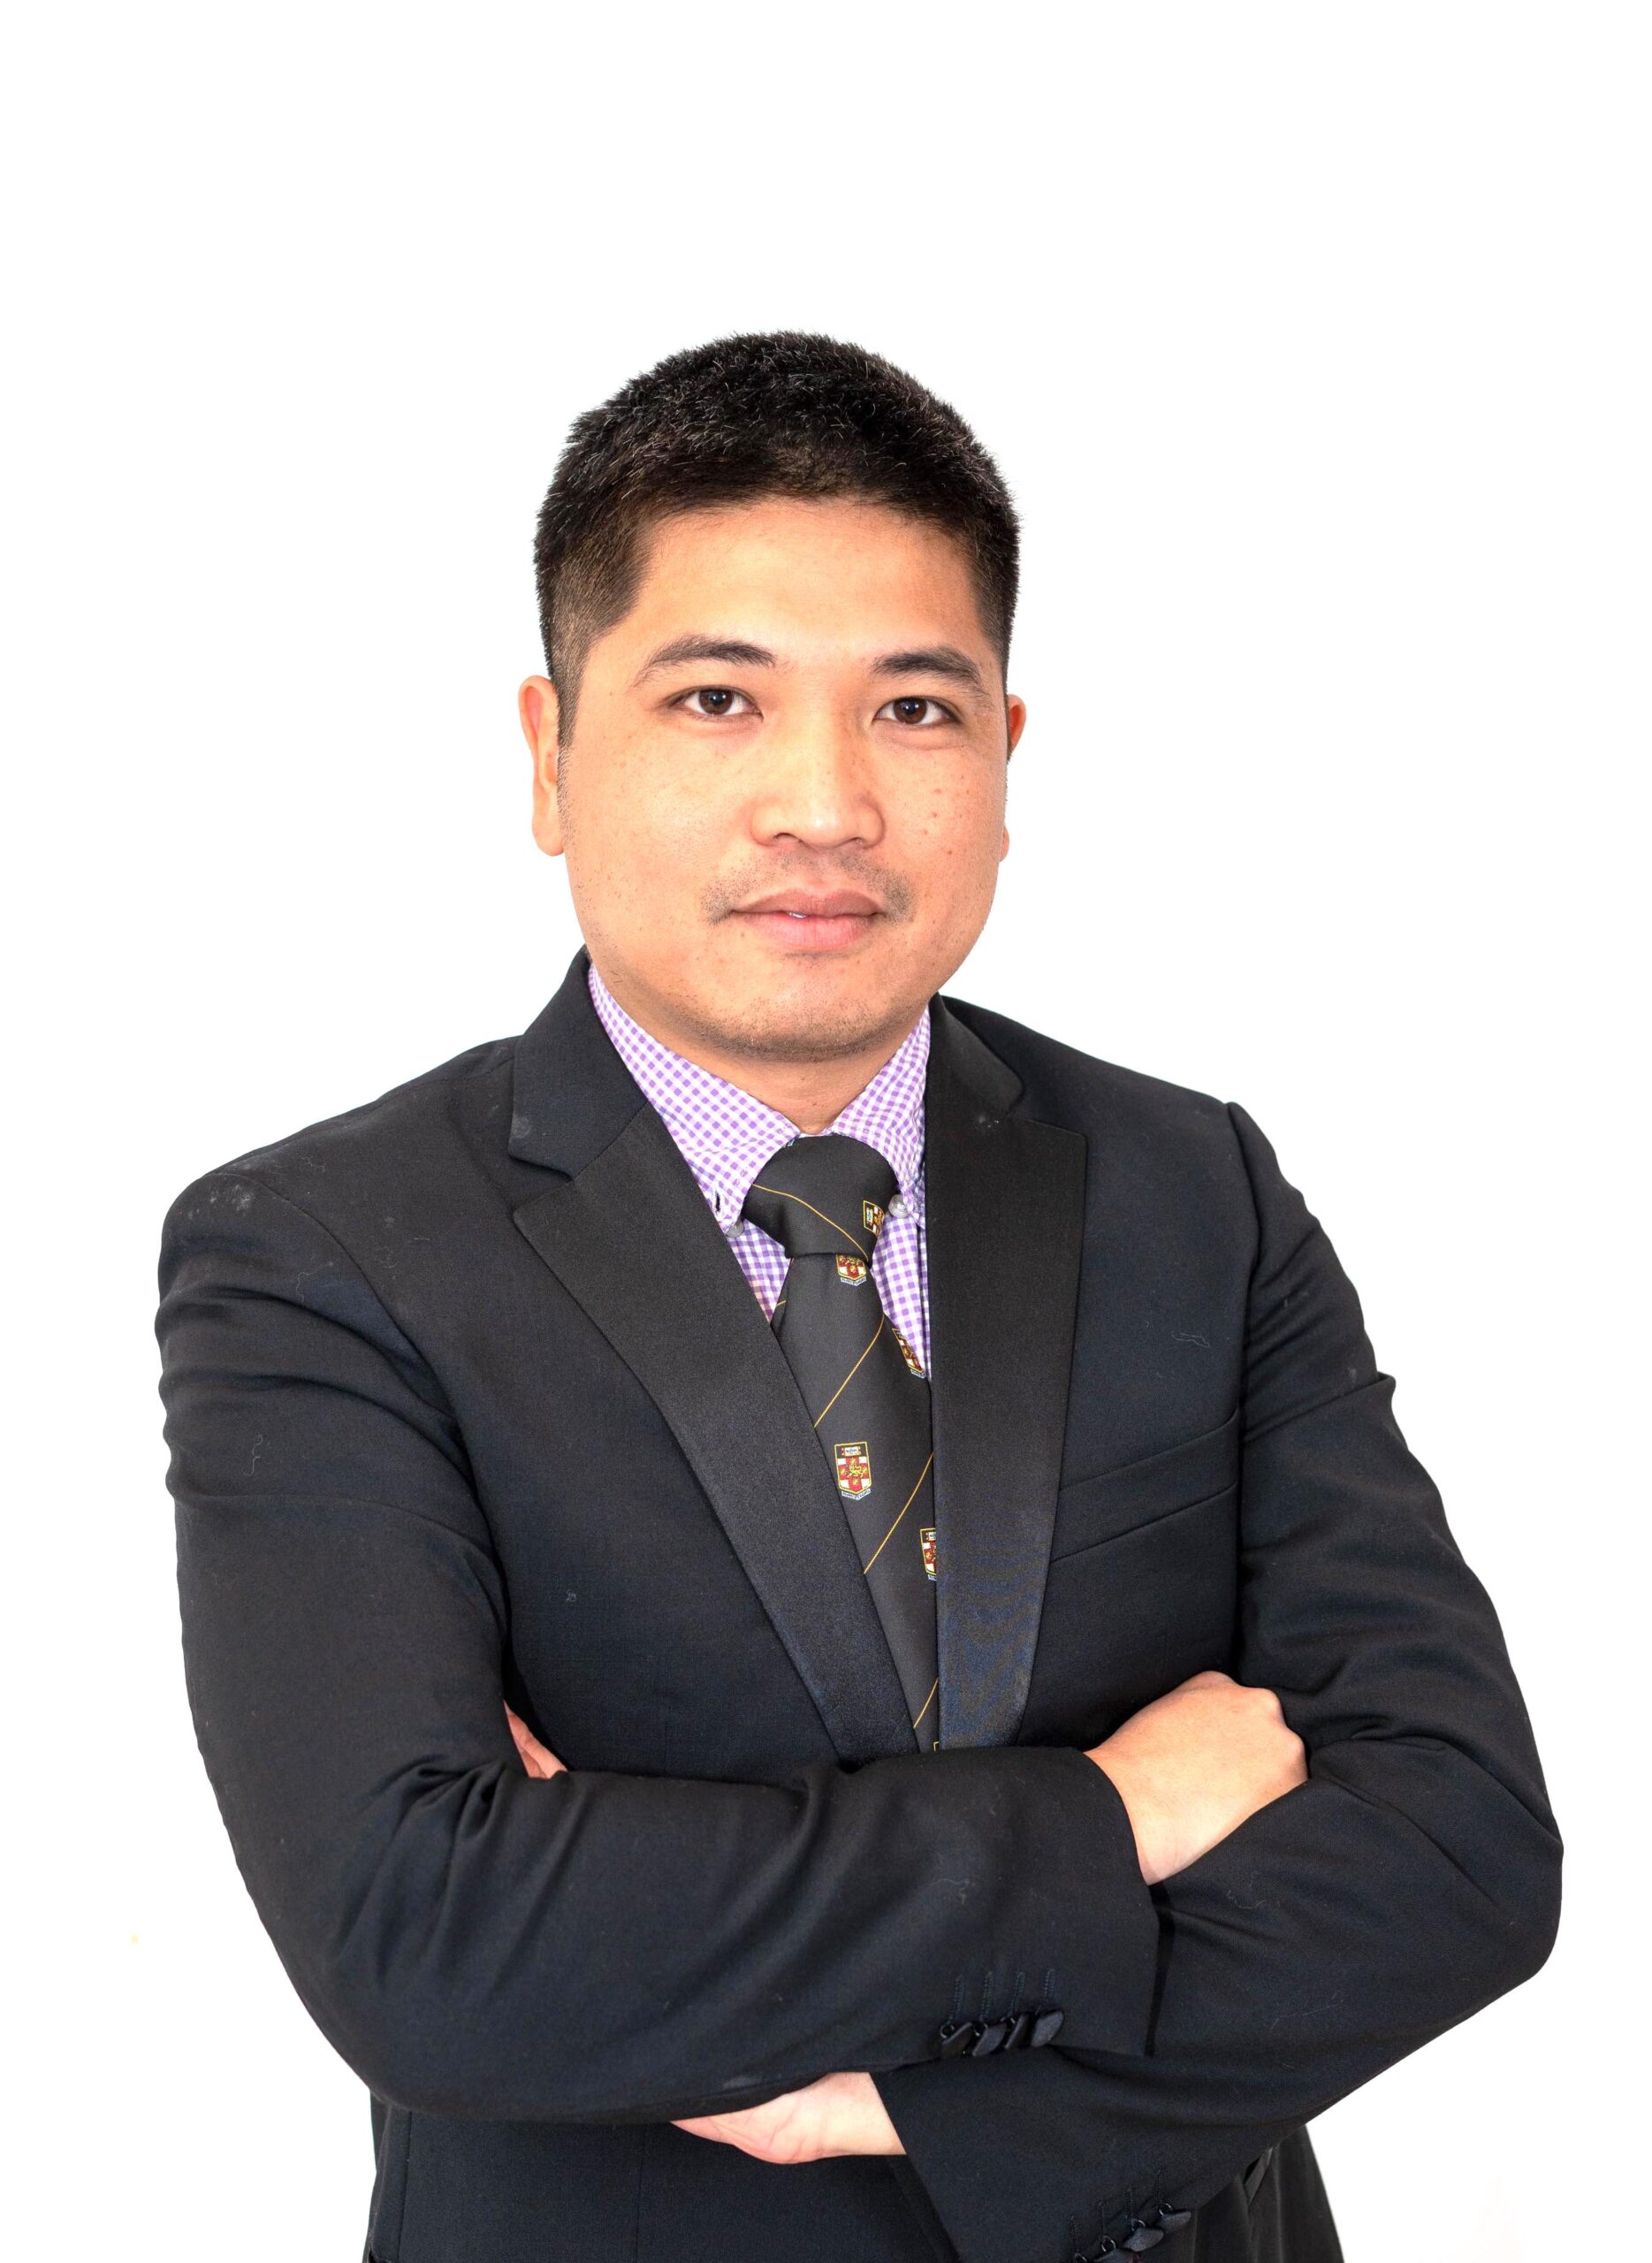 ABOUT THE INSTRUCTOR, DR. KEVIN HOANG